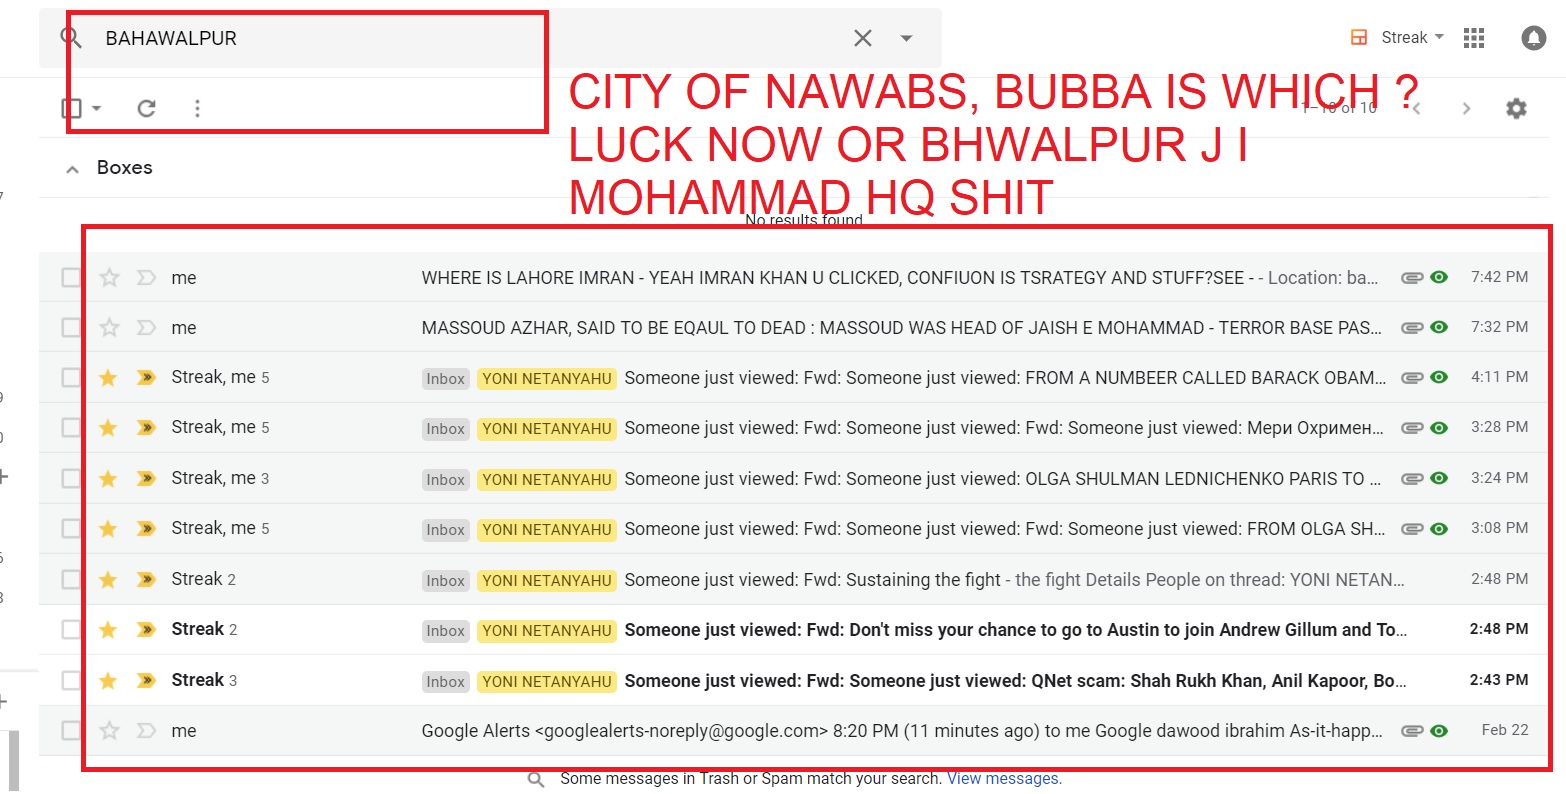 CITY OF NAWABS FROM LUCKNOW TO BHAWALPUR